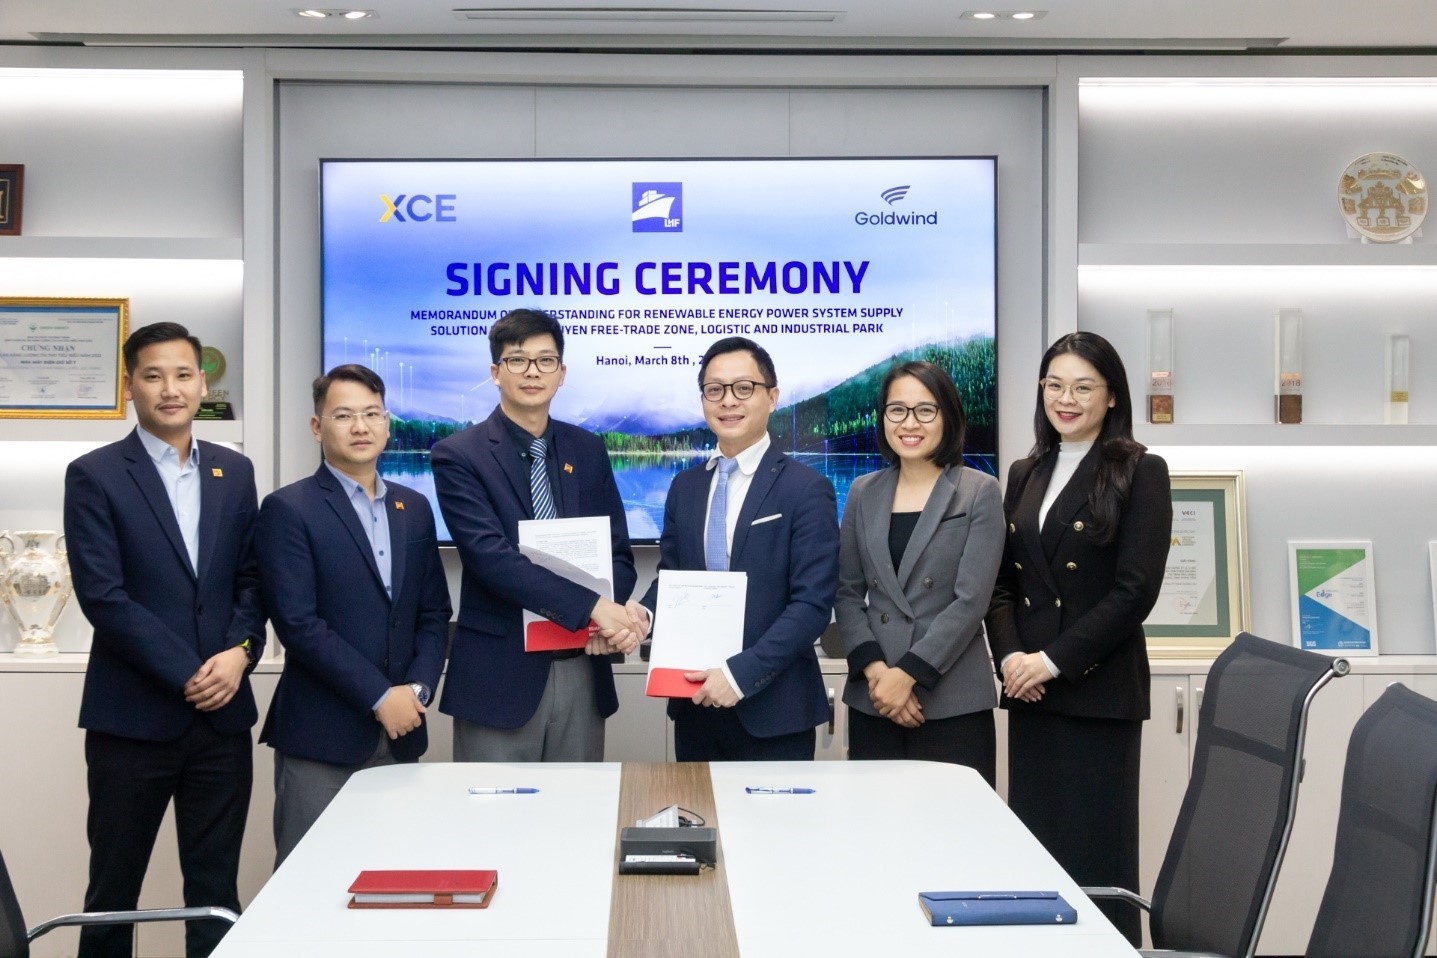 XCE Energy and Goldwind signed Memorandum of Understanding (MOU) on renewable energy power system solutions for industrial parks | Wind turbine supplier